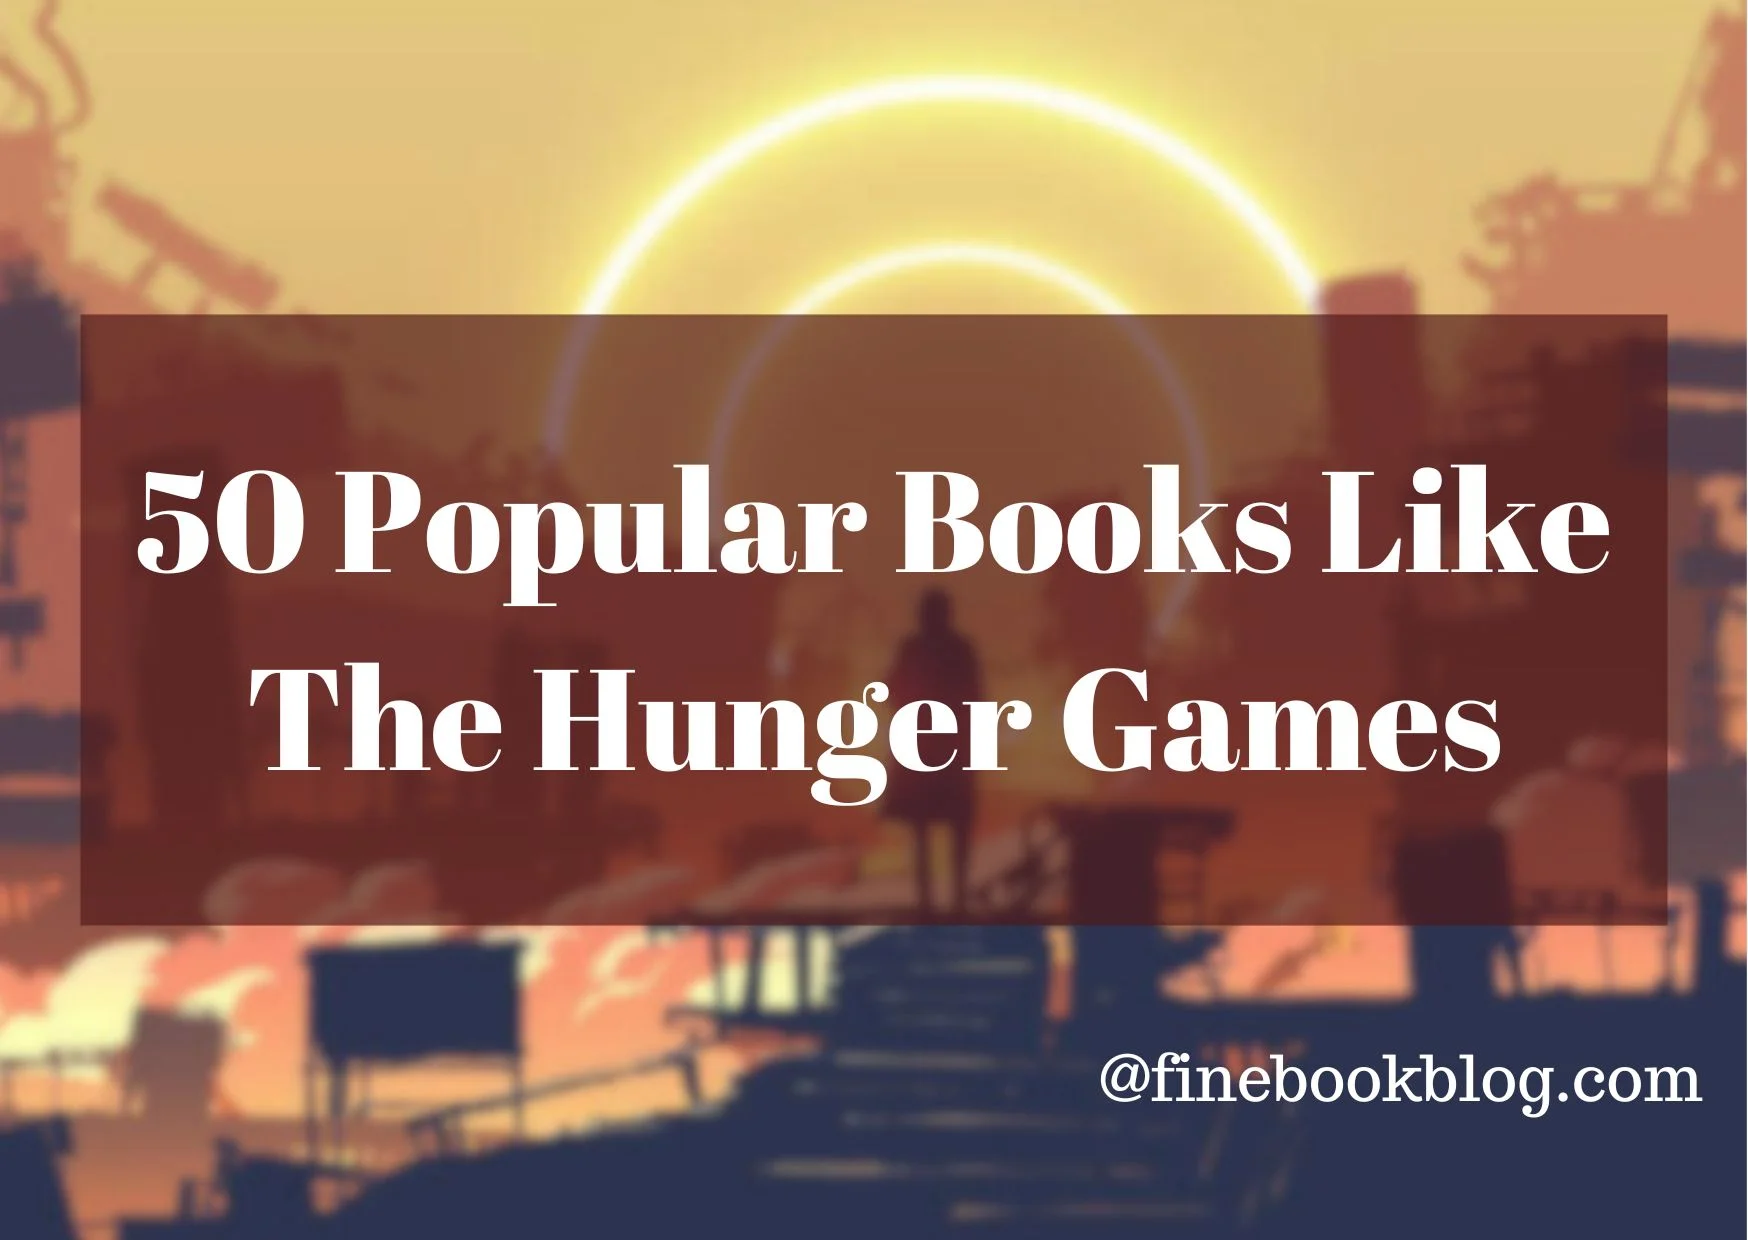 Bestselling-popular-Books-like-the-hunger-games-series-standalones-dystopian-novels-books-similar-to-hunger-games-books-to-read-if-you-like-hunger-games-cover